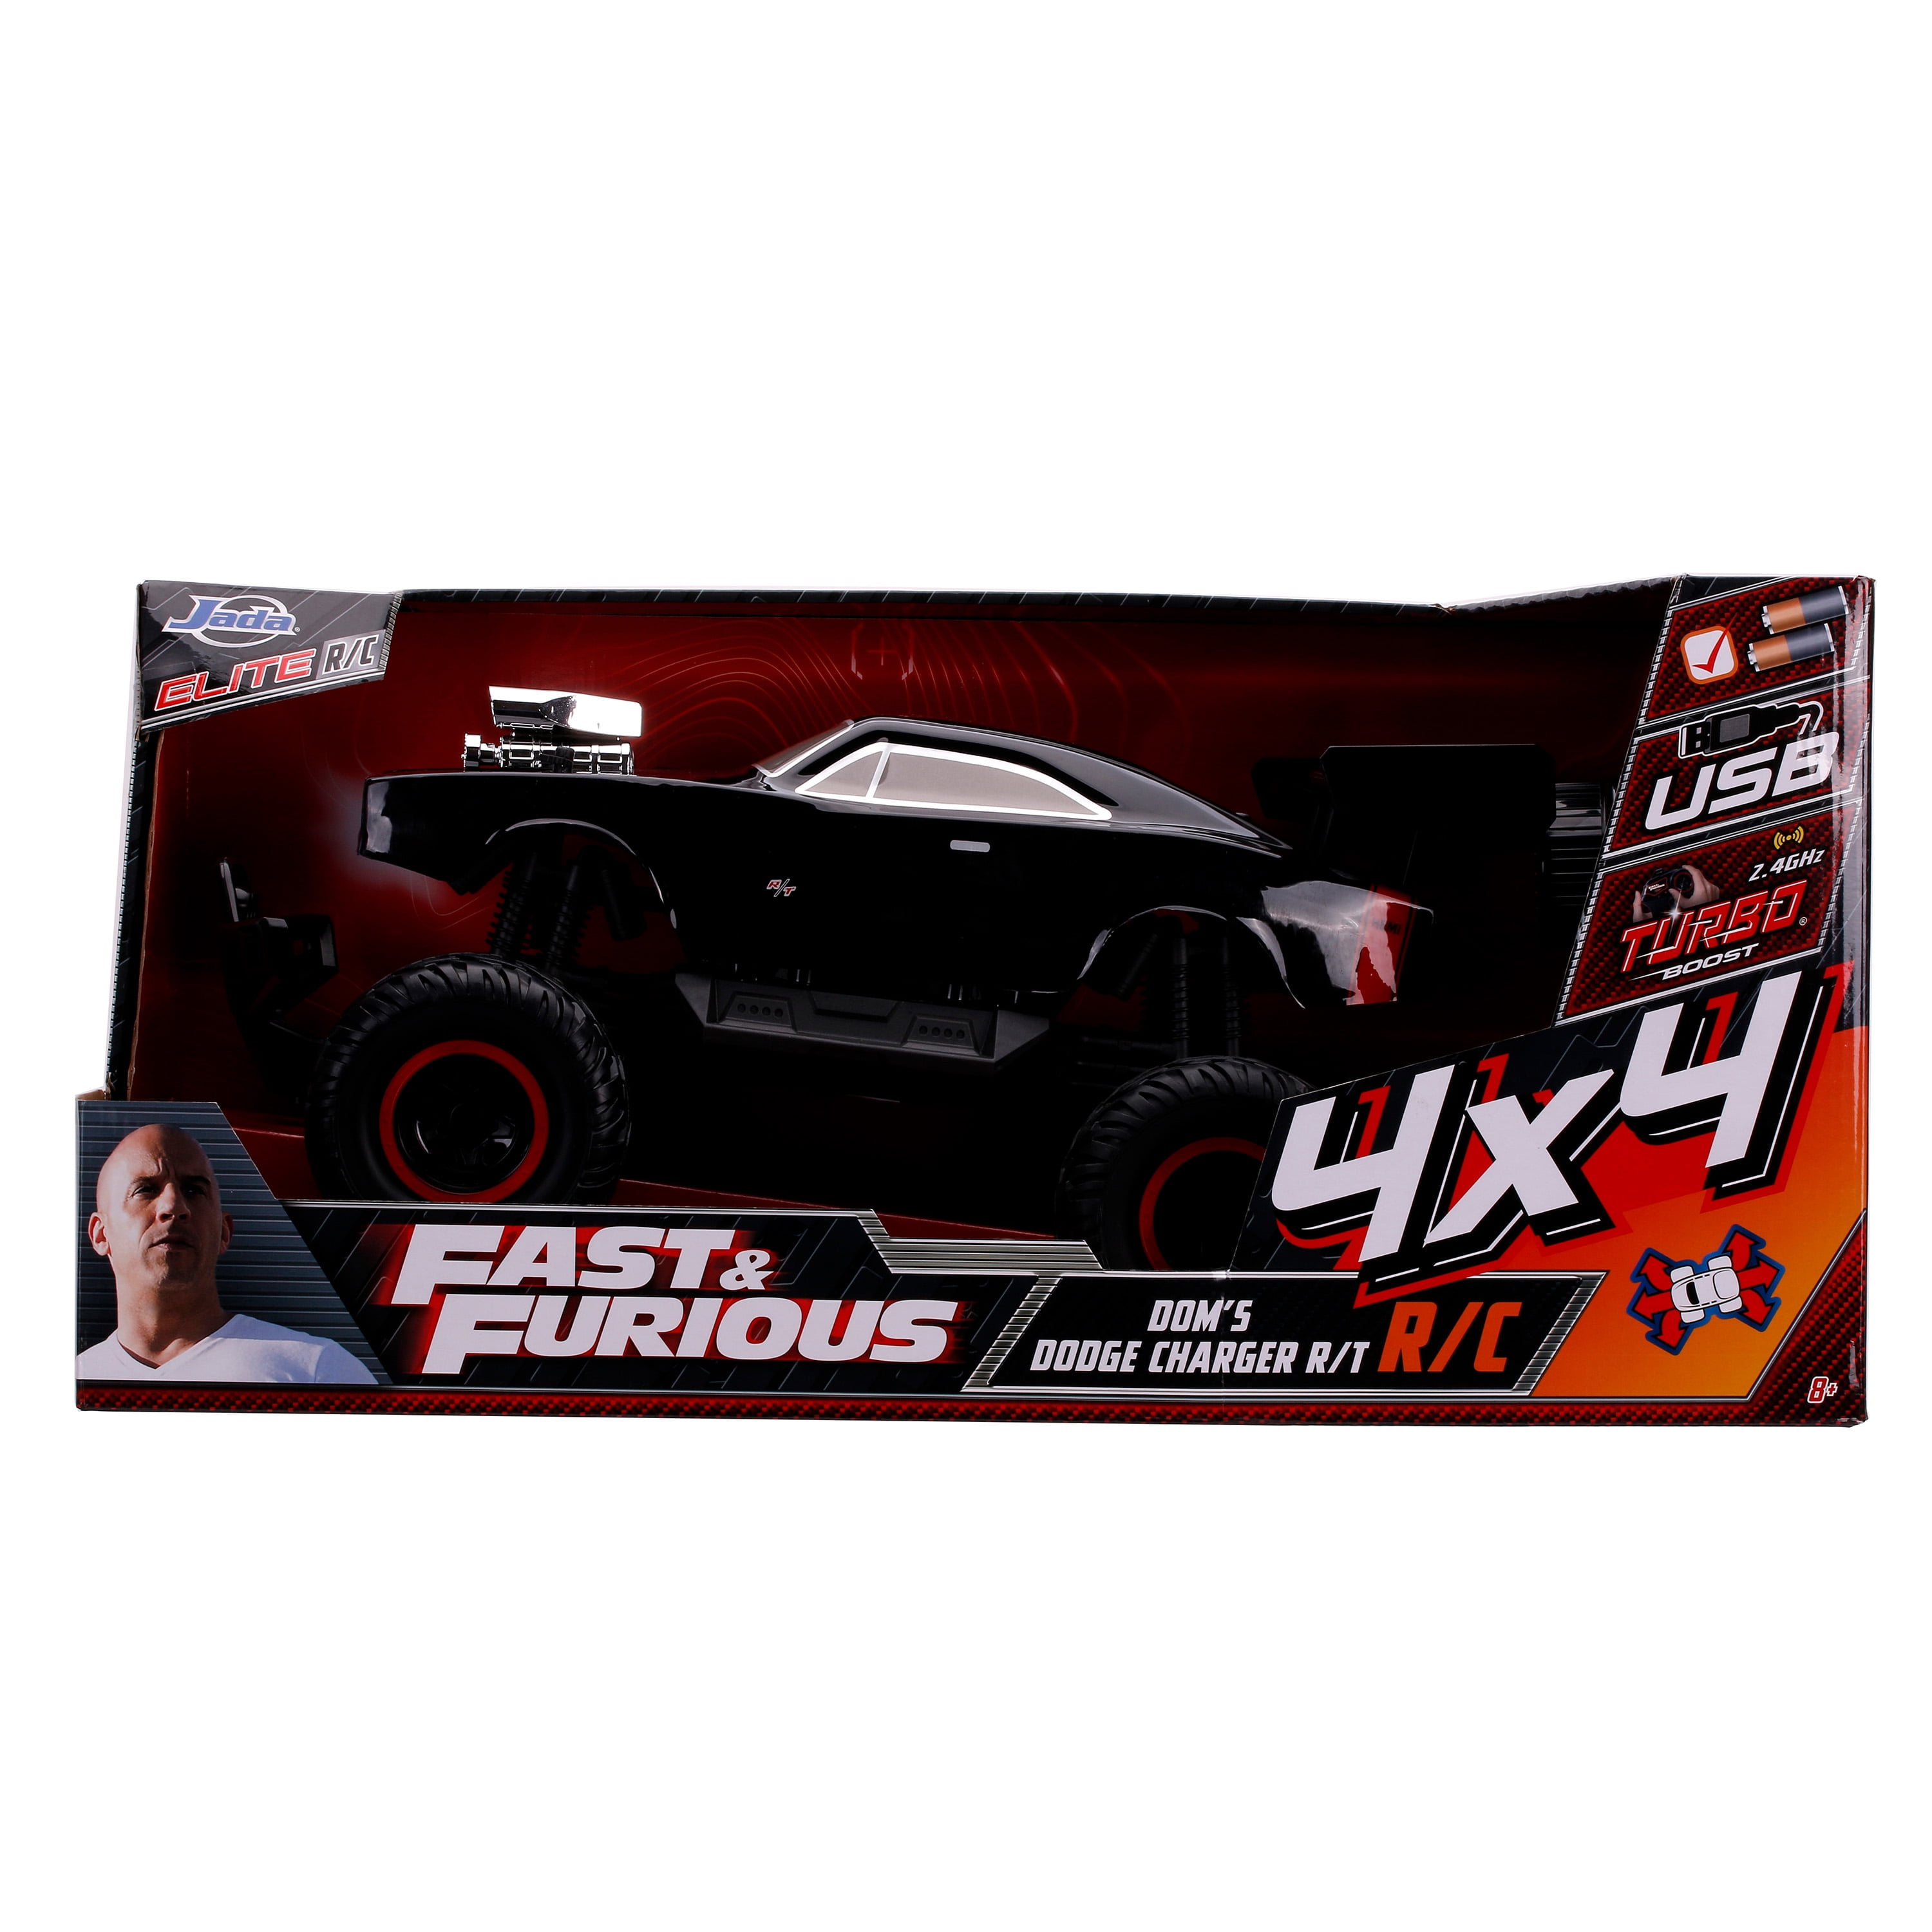 Fast & Furious 1:12 4x4 Dom's Dodge Charger R/T Elite RC Remote